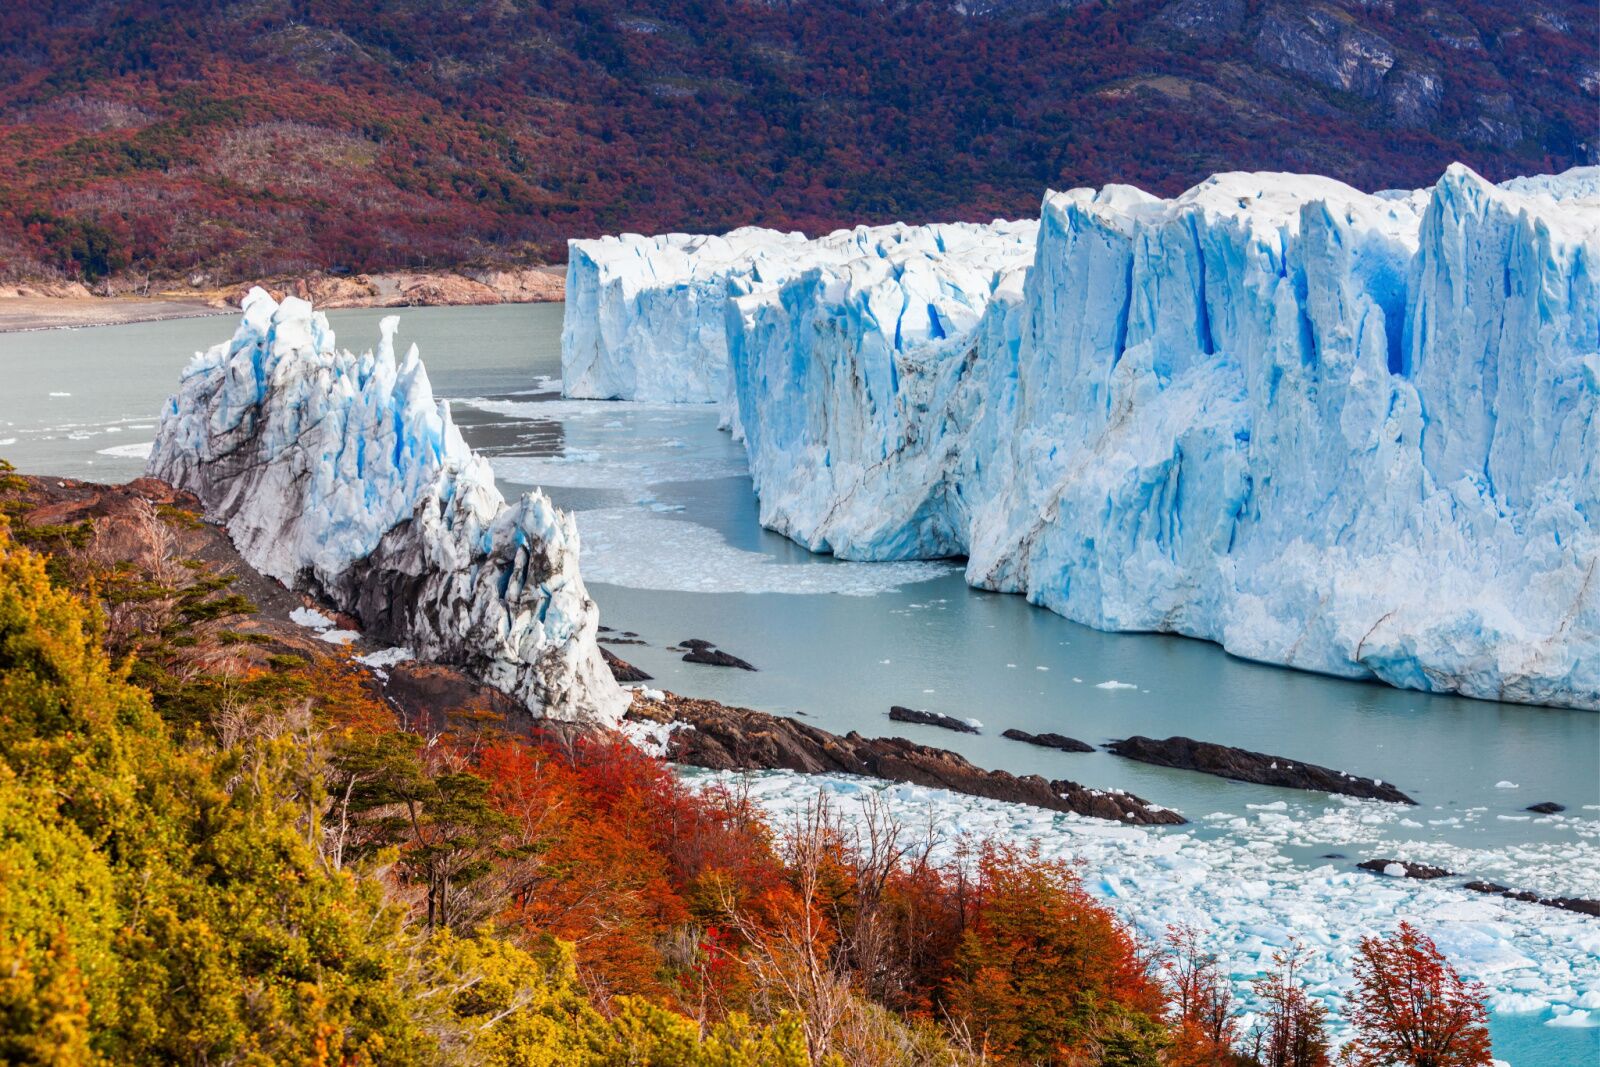 Chile national parks - in Los Glaciares National Park 